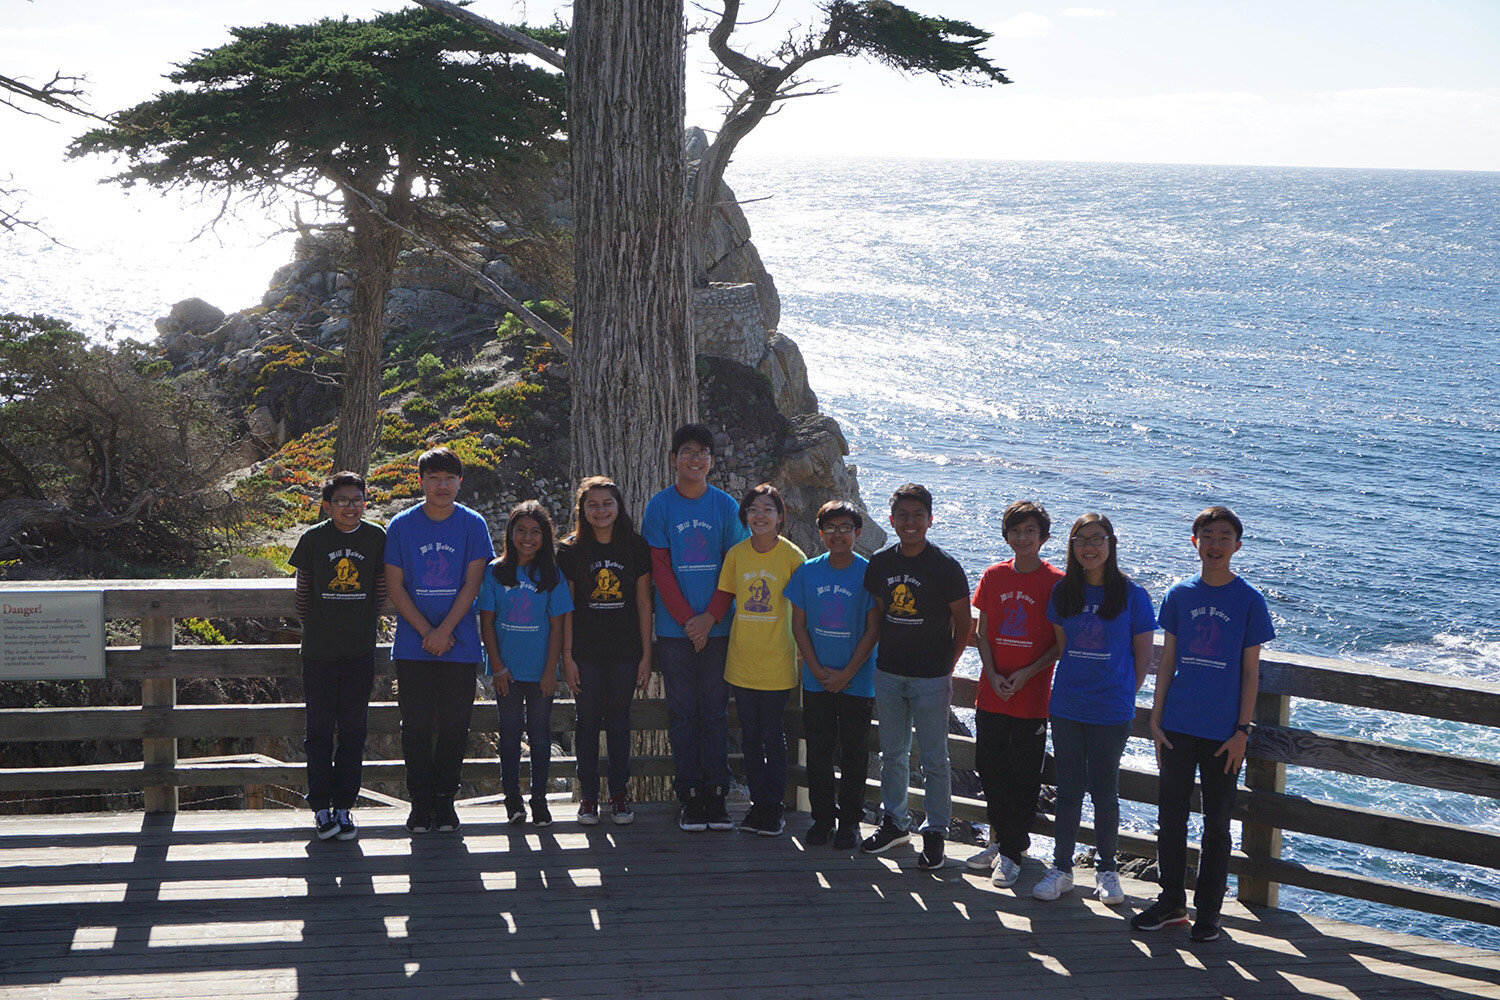  Life is more than test scores: The Lone Cypress, 17-Mile Drive 